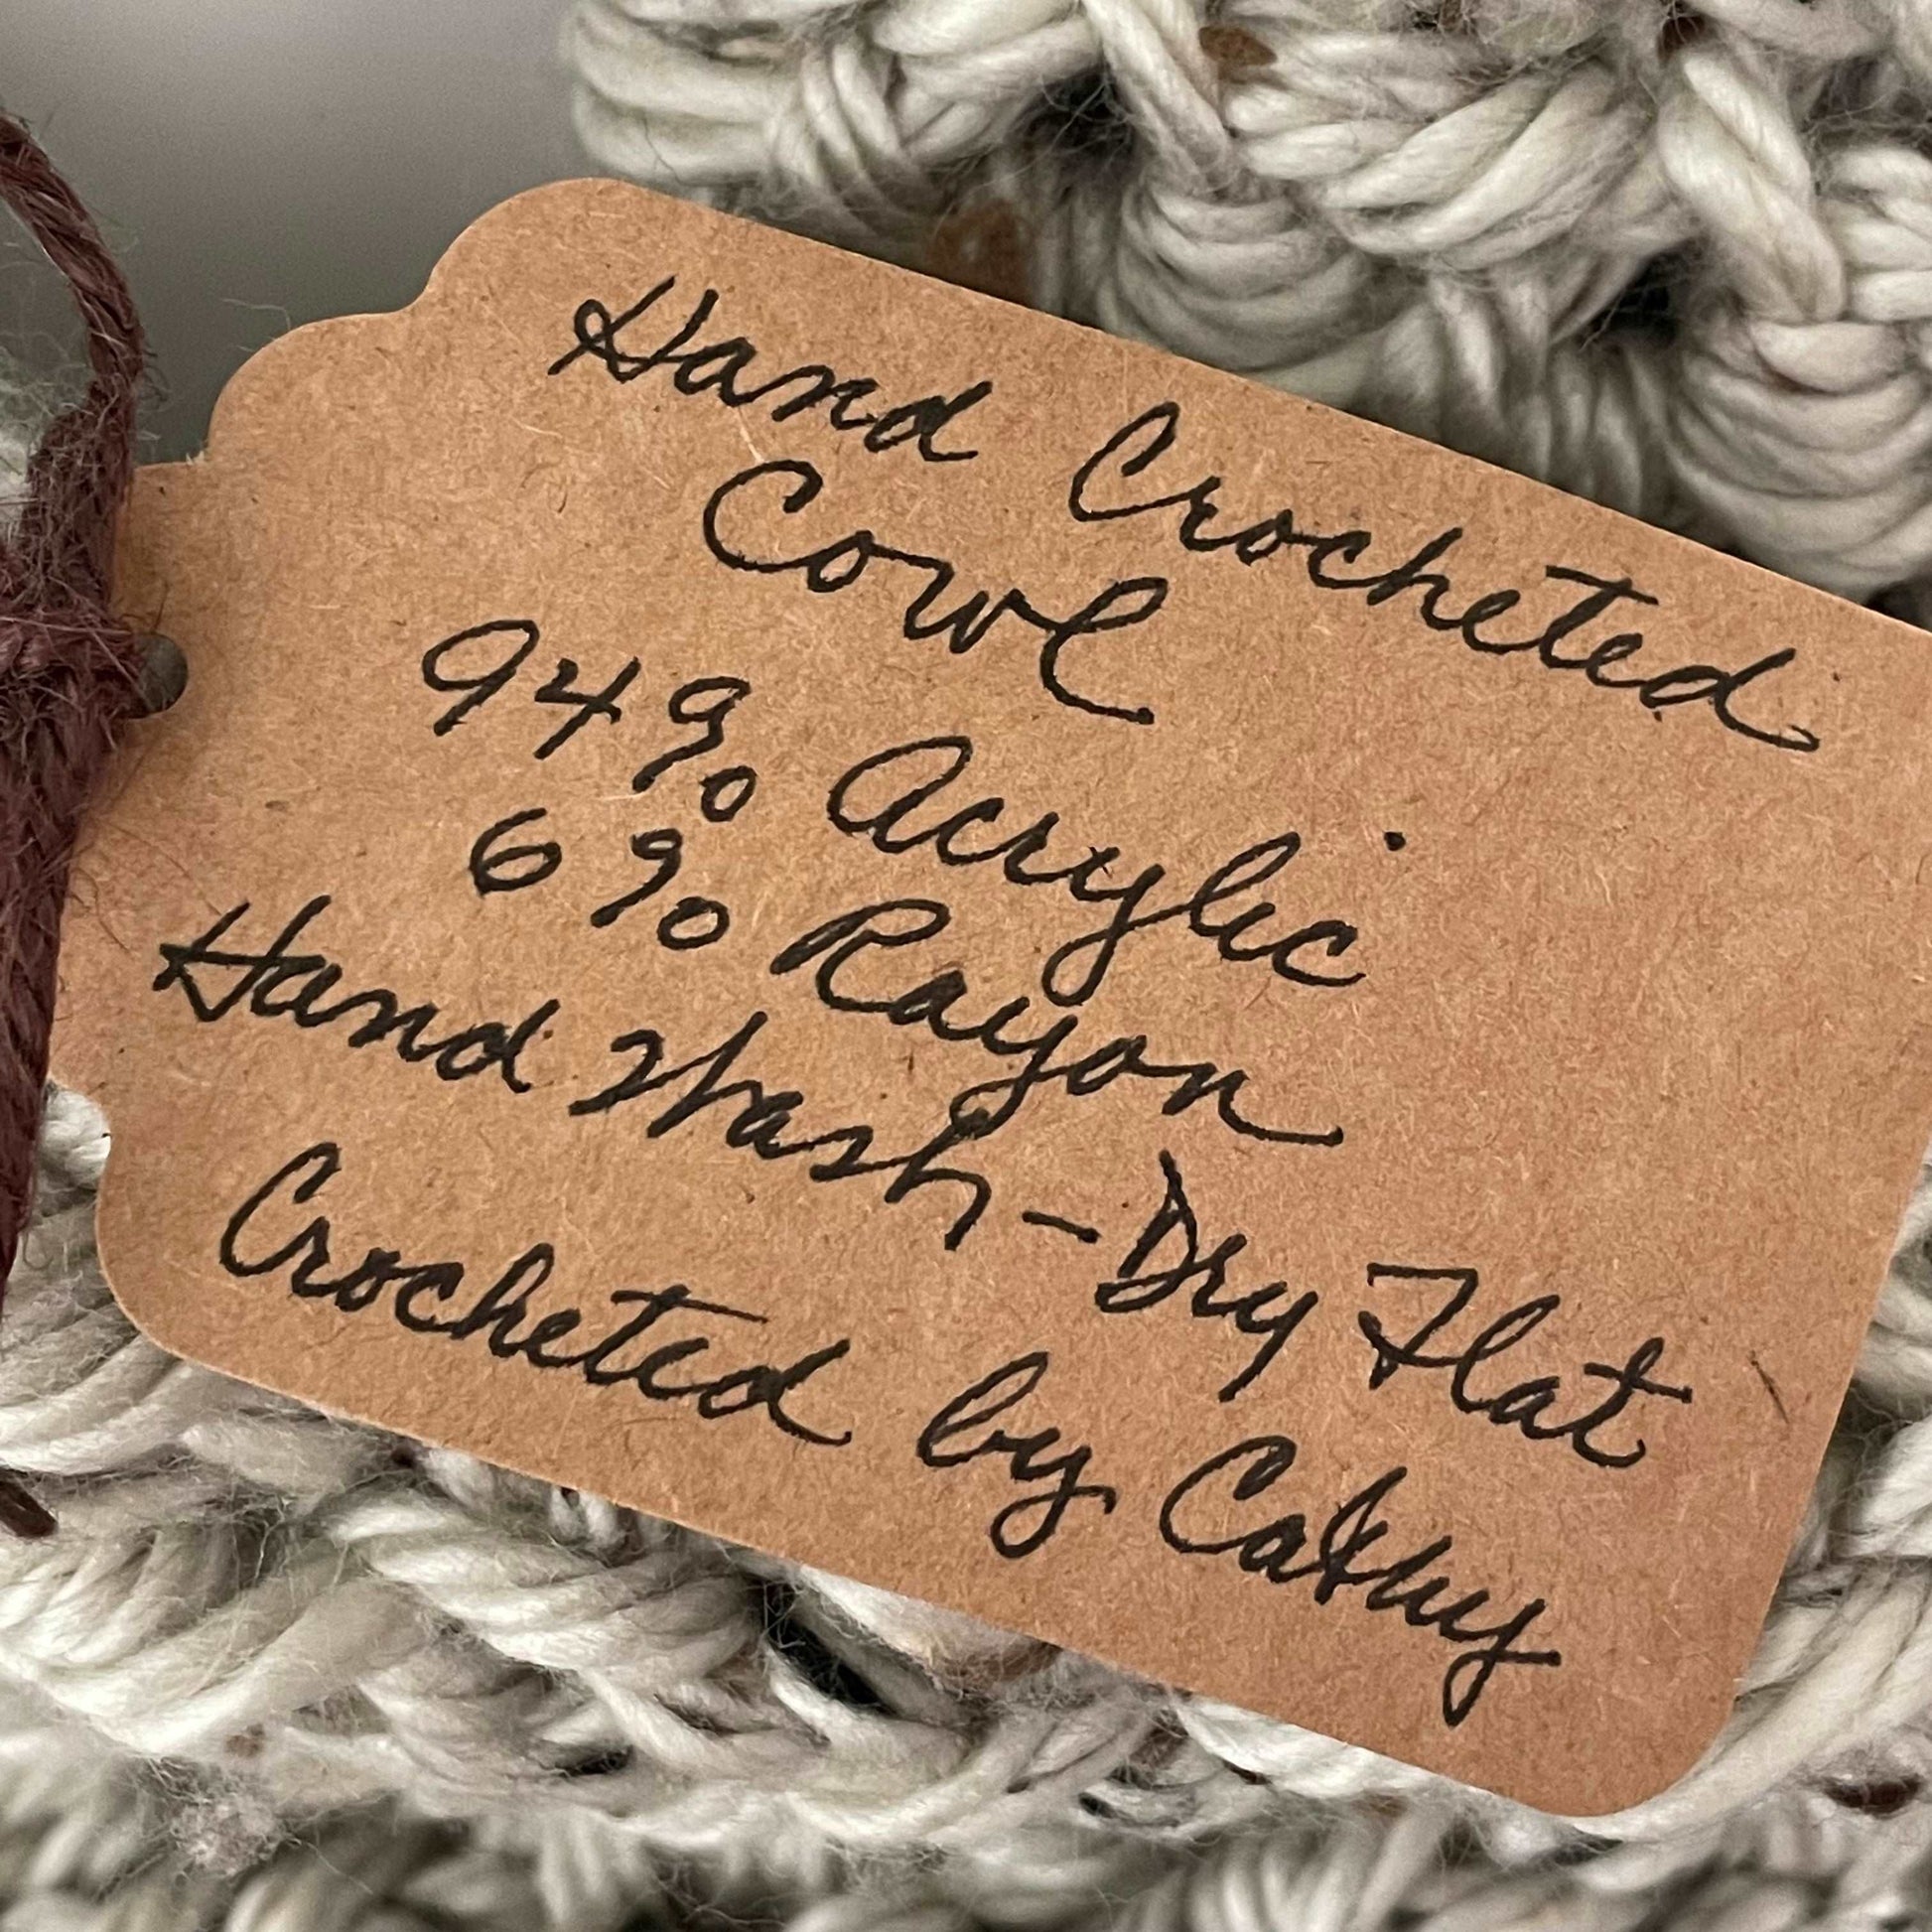 close up of handwritten tag--hand crocheted cowl 94% acrylic 6% rayon hand wash dry flat crocheted by cathy